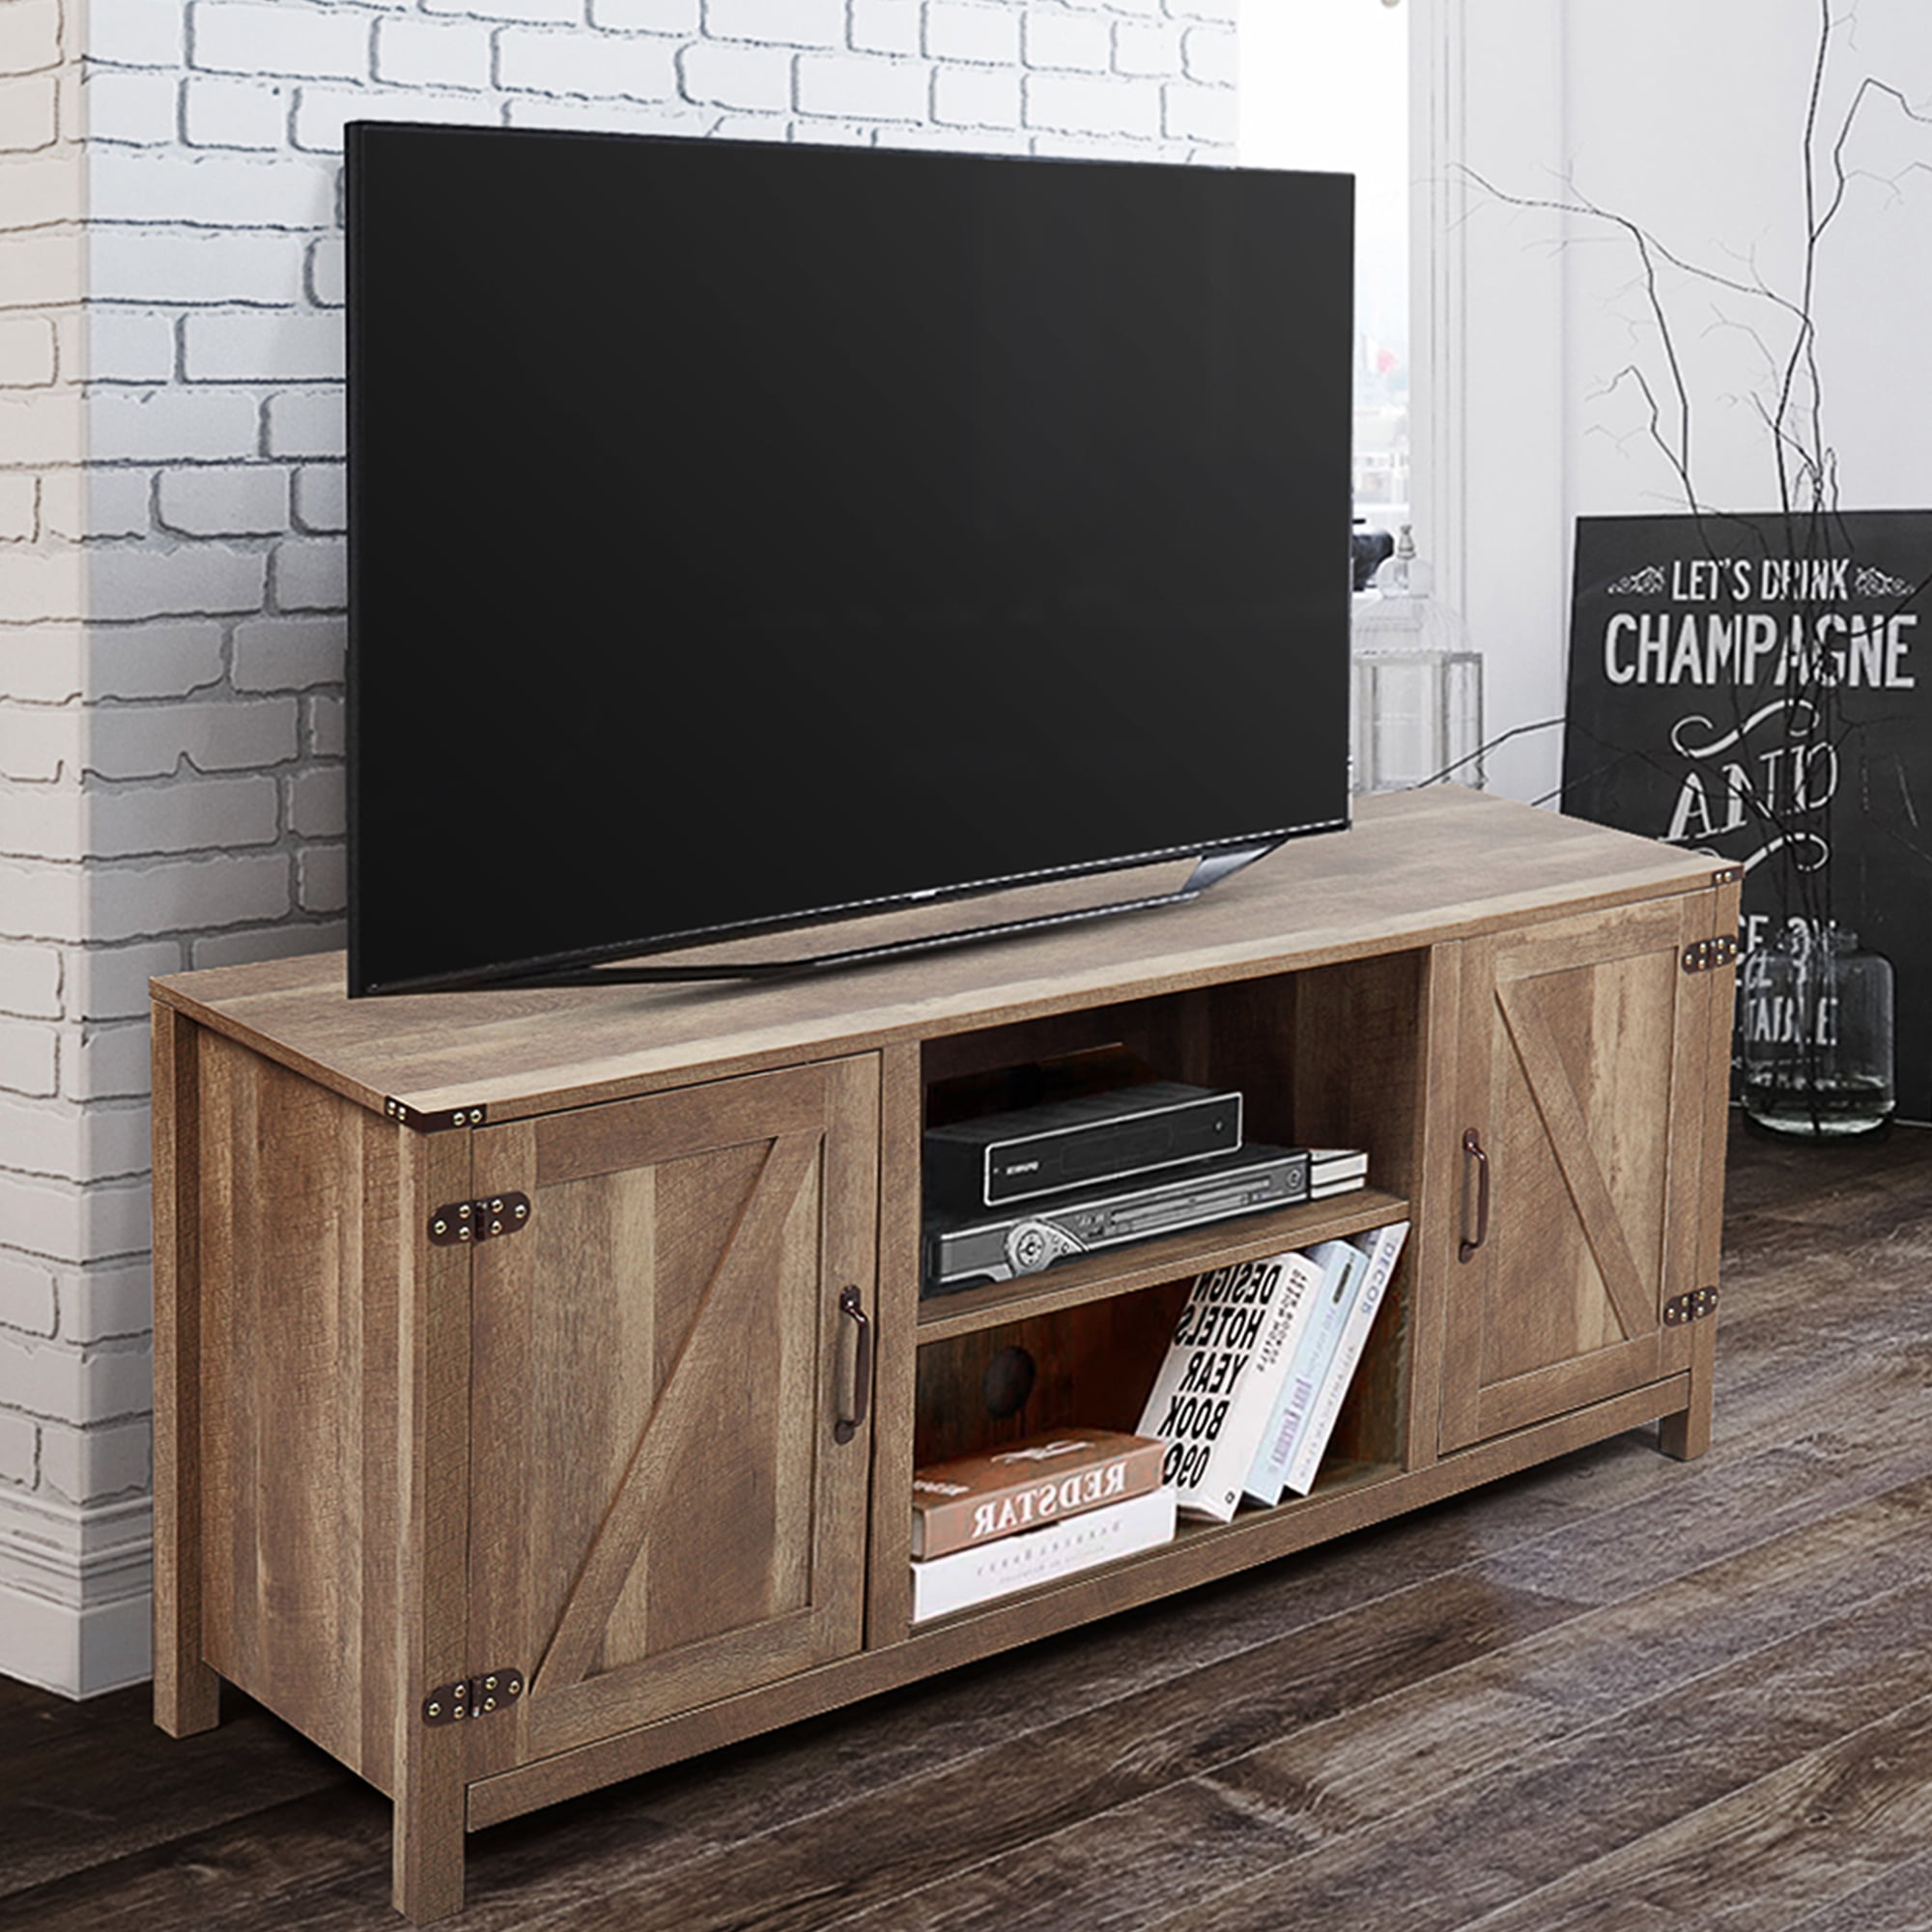 Functional TV Stands With Built in Storage